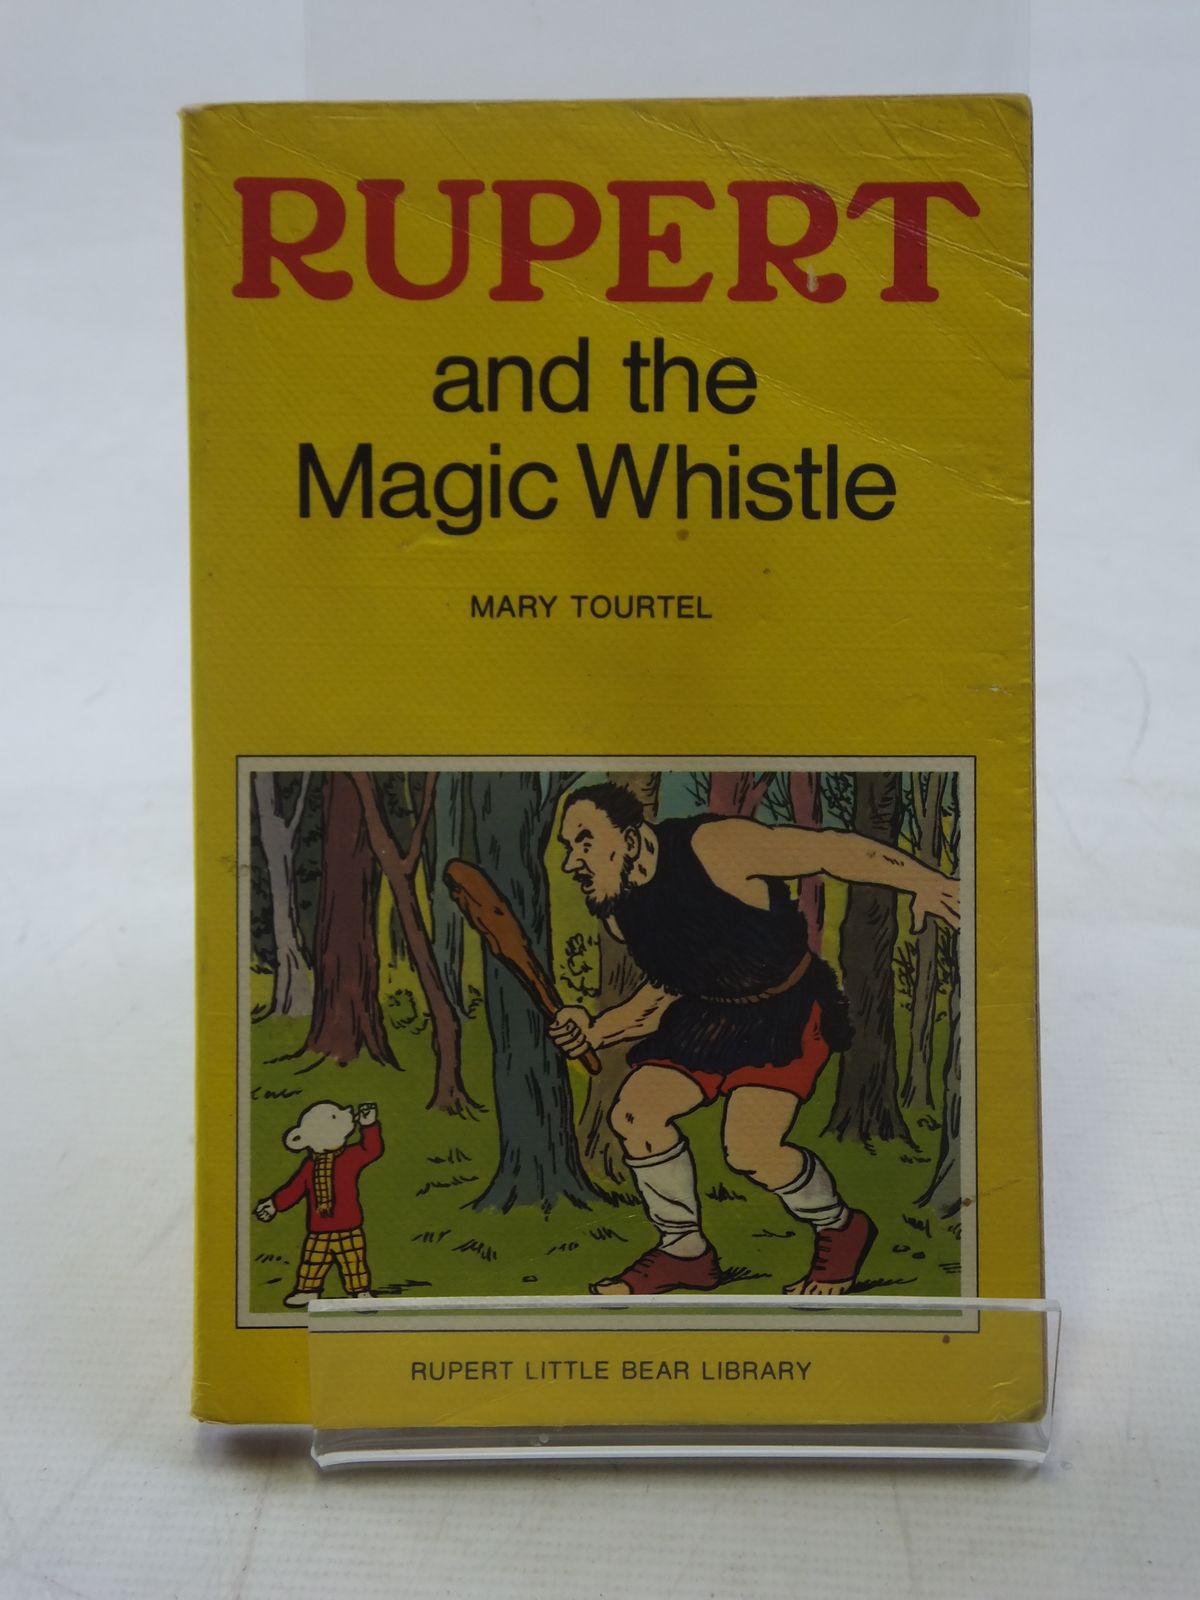 Photo of RUPERT AND THE MAGIC WHISTLE - RUPERT LITTLE BEAR LIBRARY No. 9 (WOOLWORTH) written by Tourtel, Mary illustrated by Tourtel, Mary published by Sampson Low, Marston &amp; Co. Ltd. (STOCK CODE: 2117147)  for sale by Stella & Rose's Books